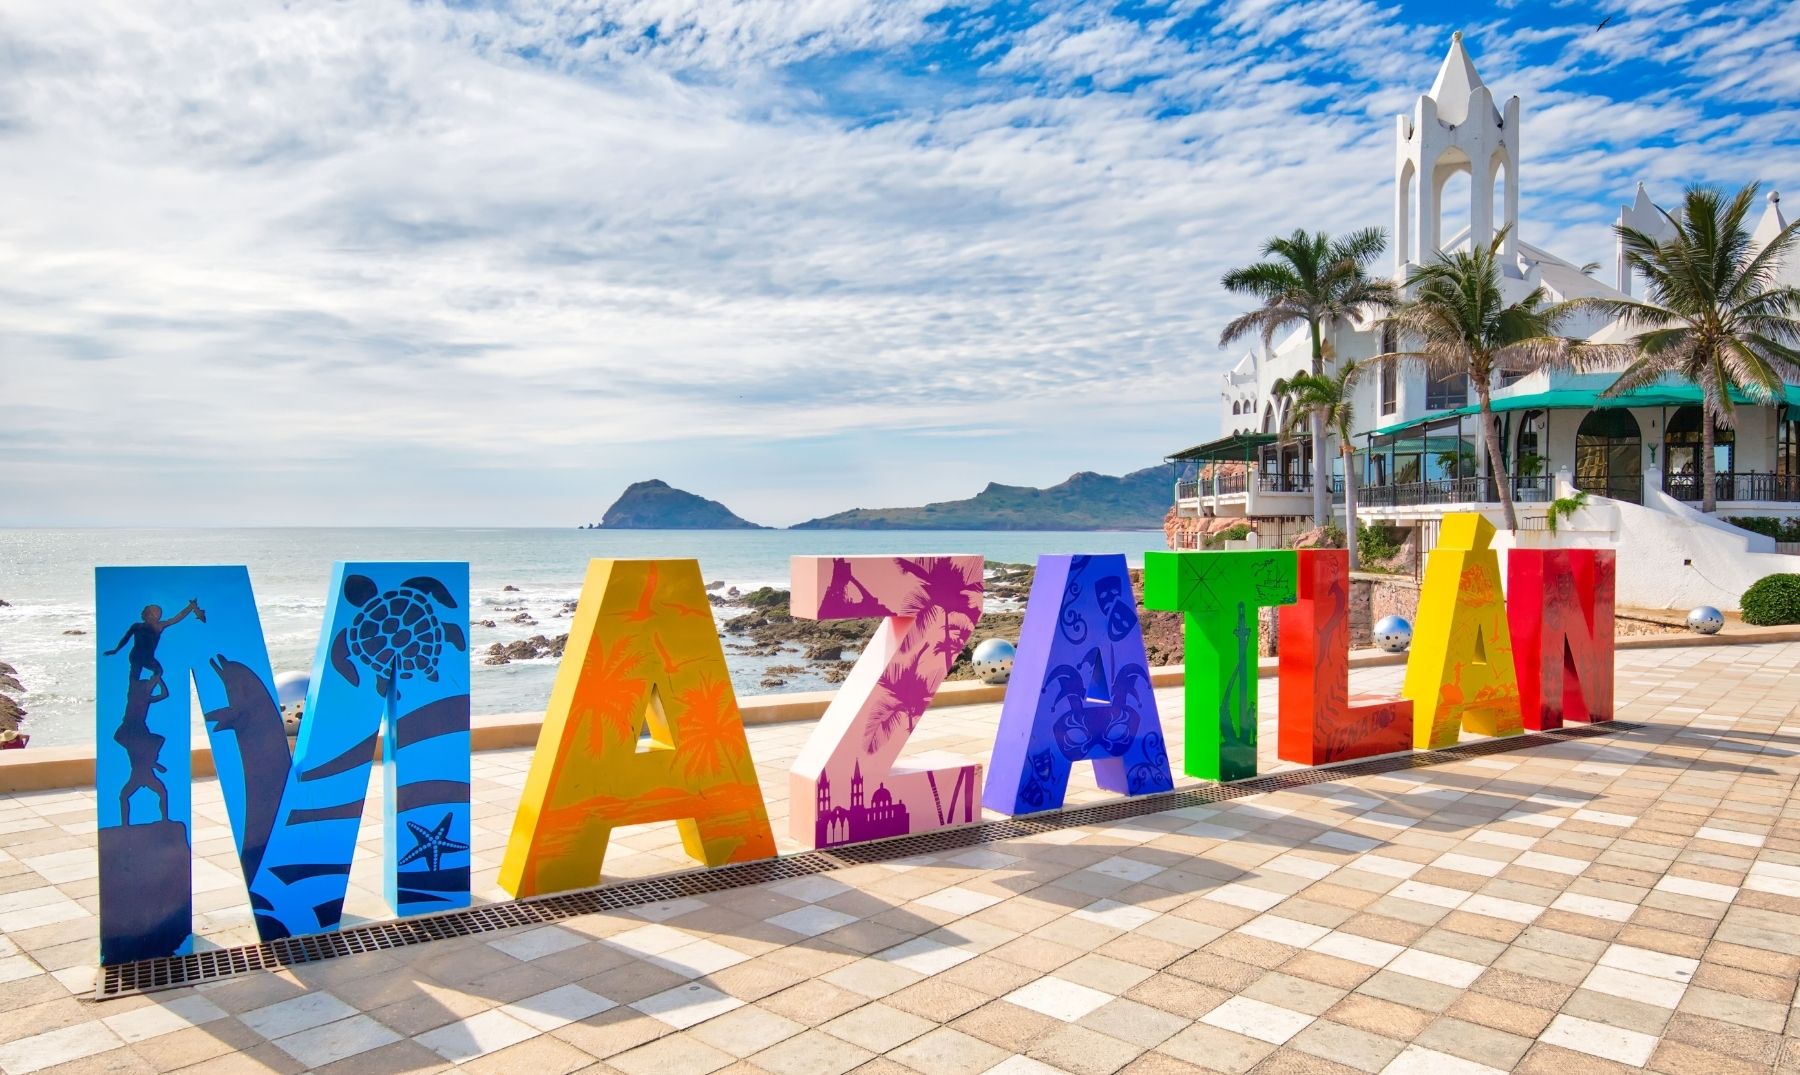 50% OFF on flights from Edmonton to Mazatlan (Mexico) with a promo code!